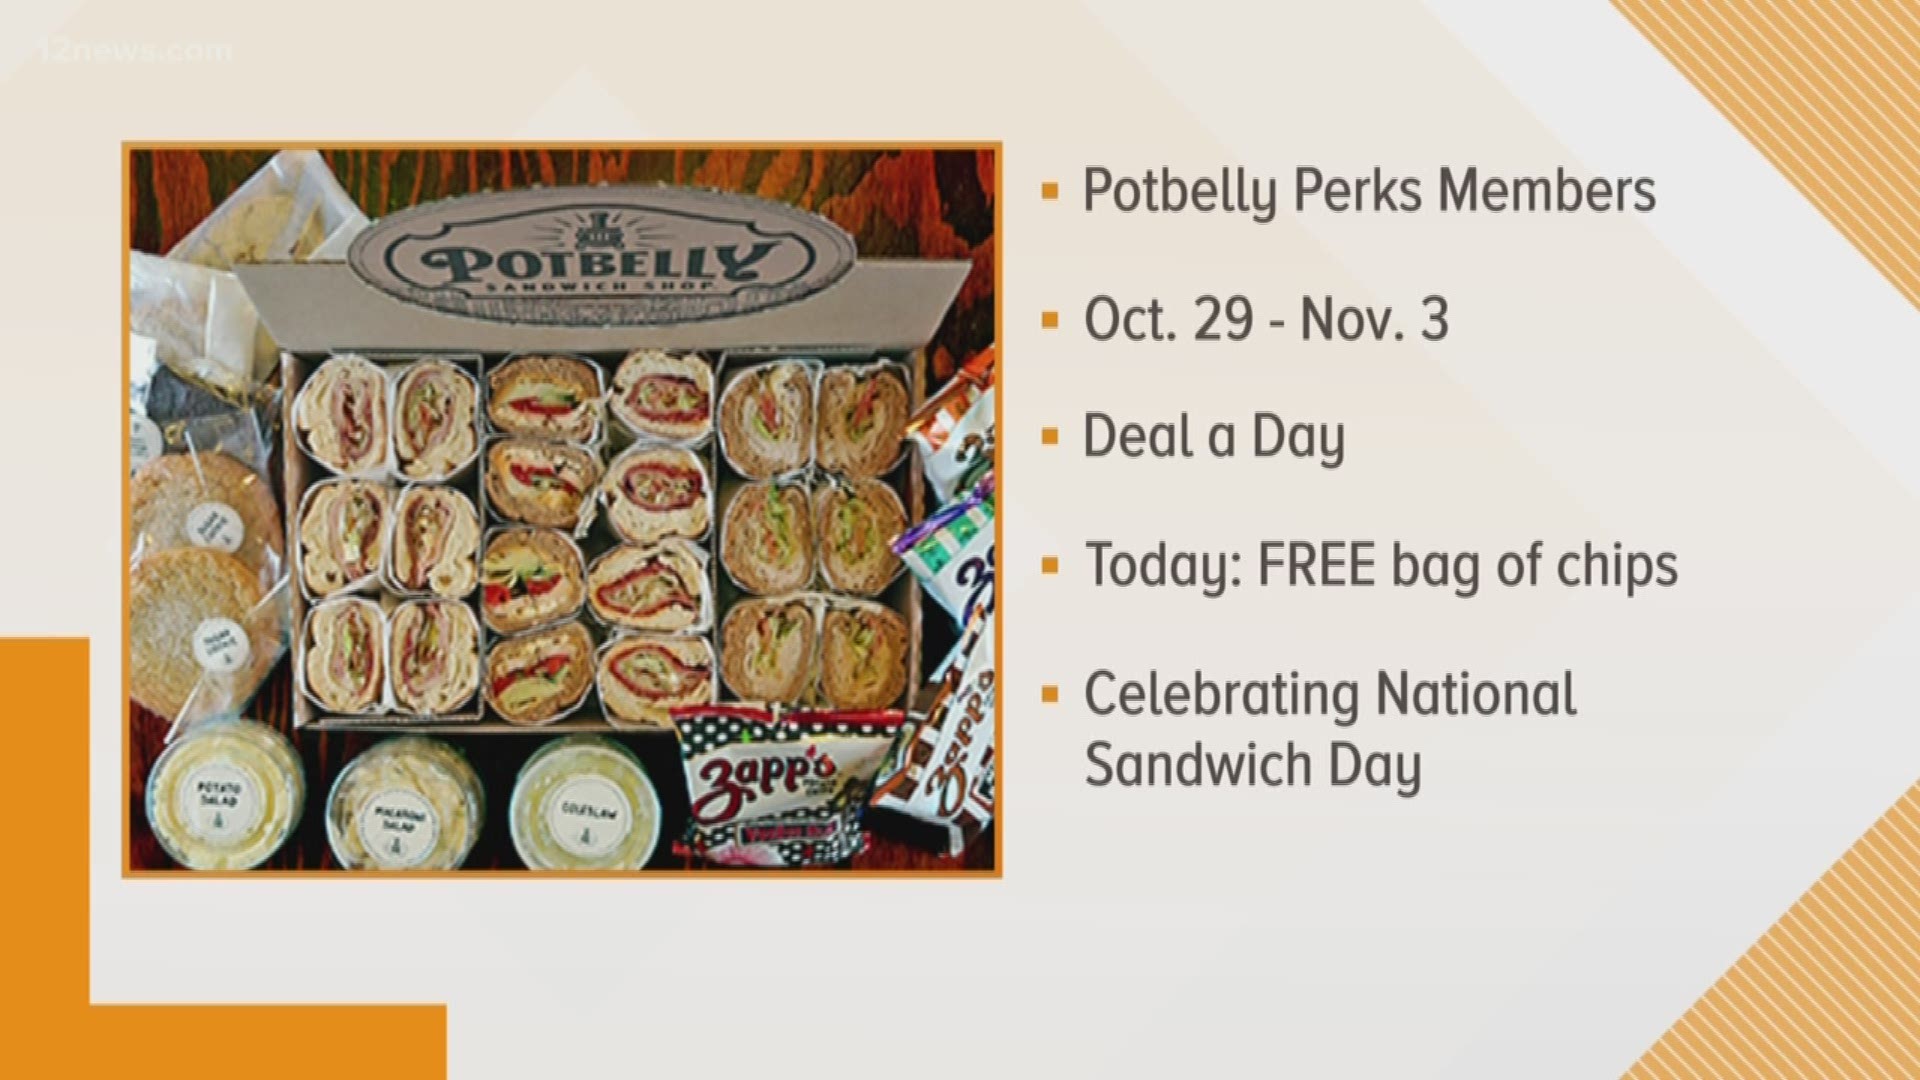 Potbelly is rolling out a deal a day up until National Sandwich Day, Dairy Queens has a few deals to scream about, and Breugger's Bagels has a Halloween deal on bagel bundles.